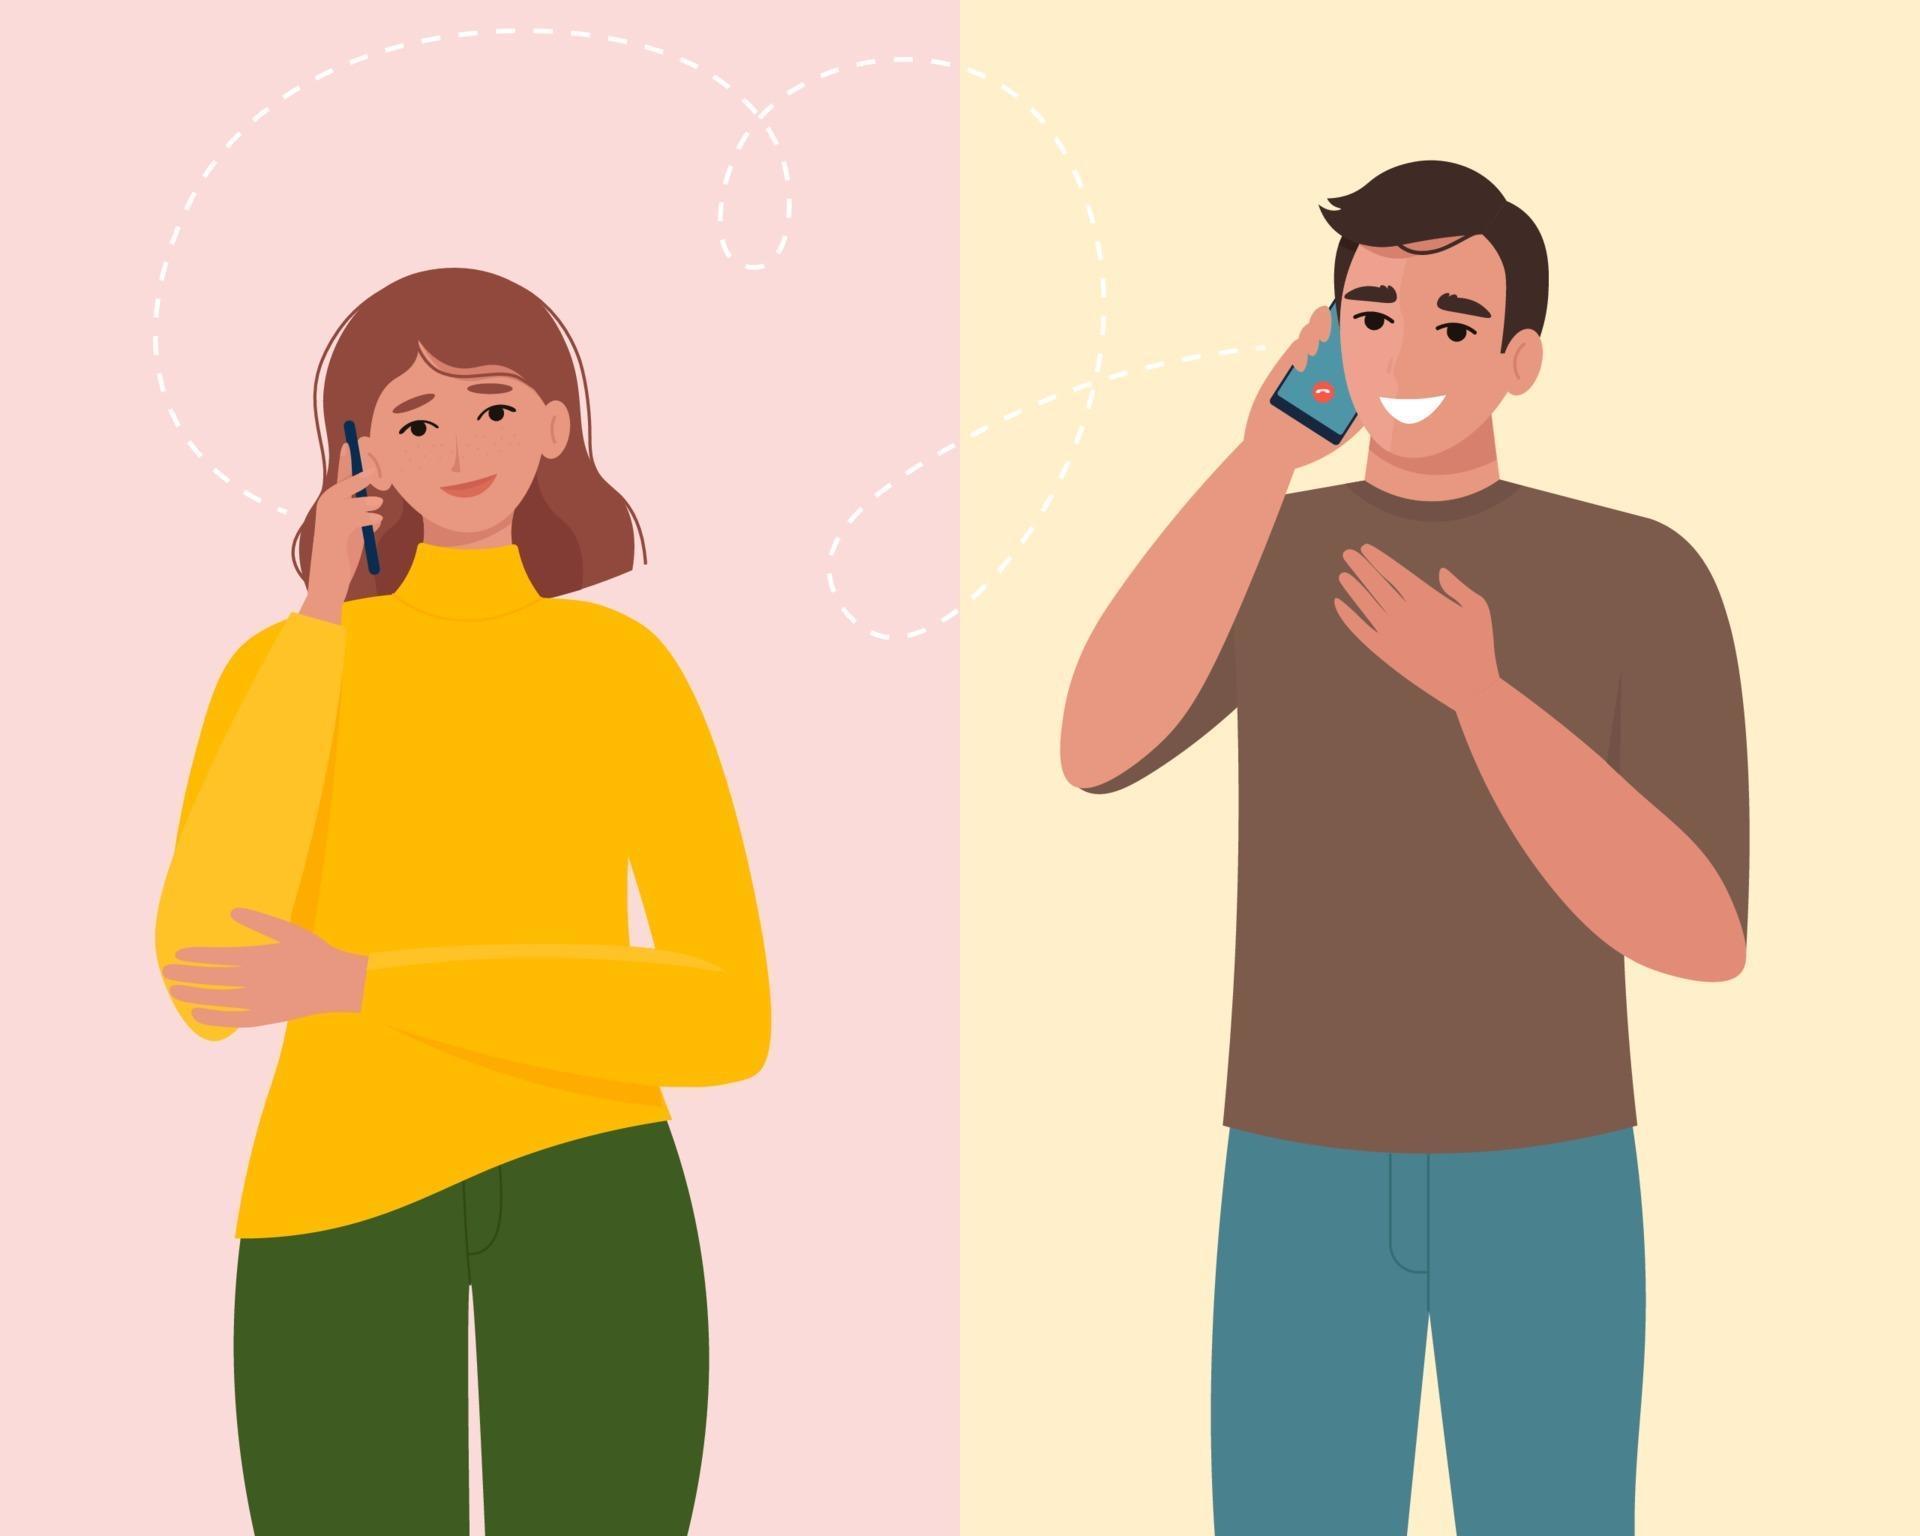 Man And Woman Talking On The Phone Communication And Conversation With Smartphone Vector 